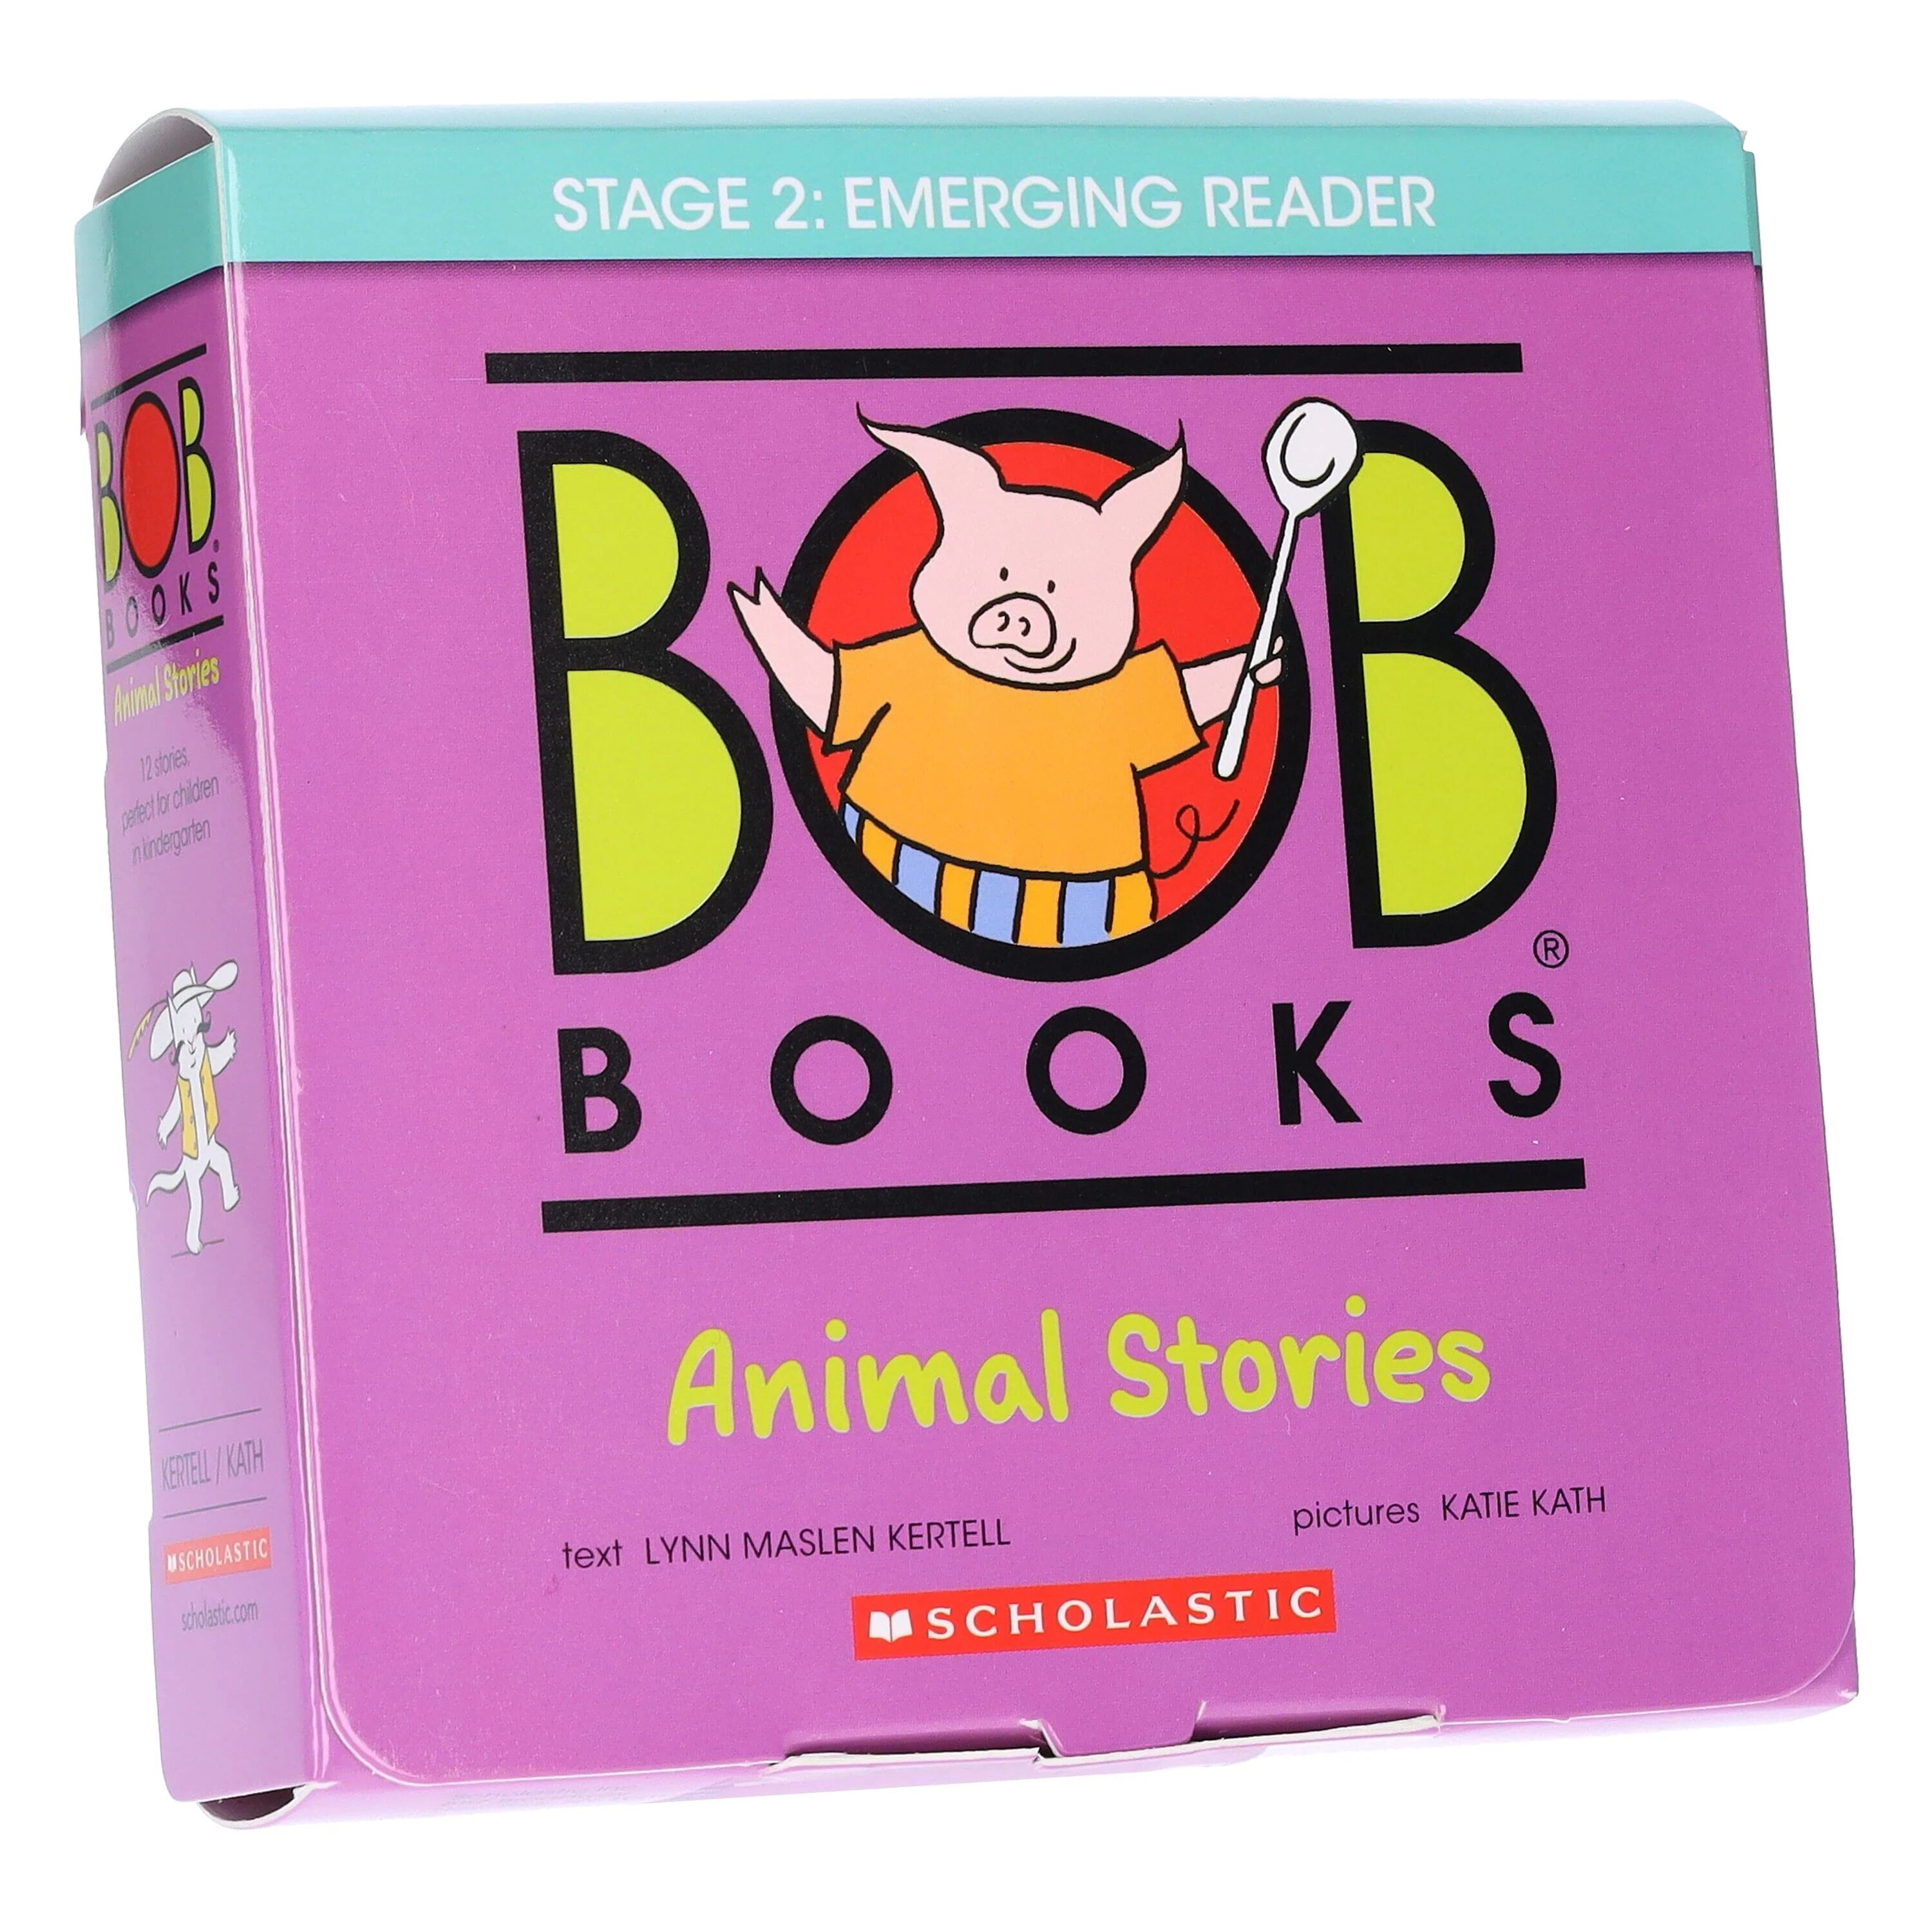 Bob Books: Animal Stories (Stage 2: Emerging Reader) 12 Books Collection Set By Scholastic - Ages 3-6 - Paperback Scholastic